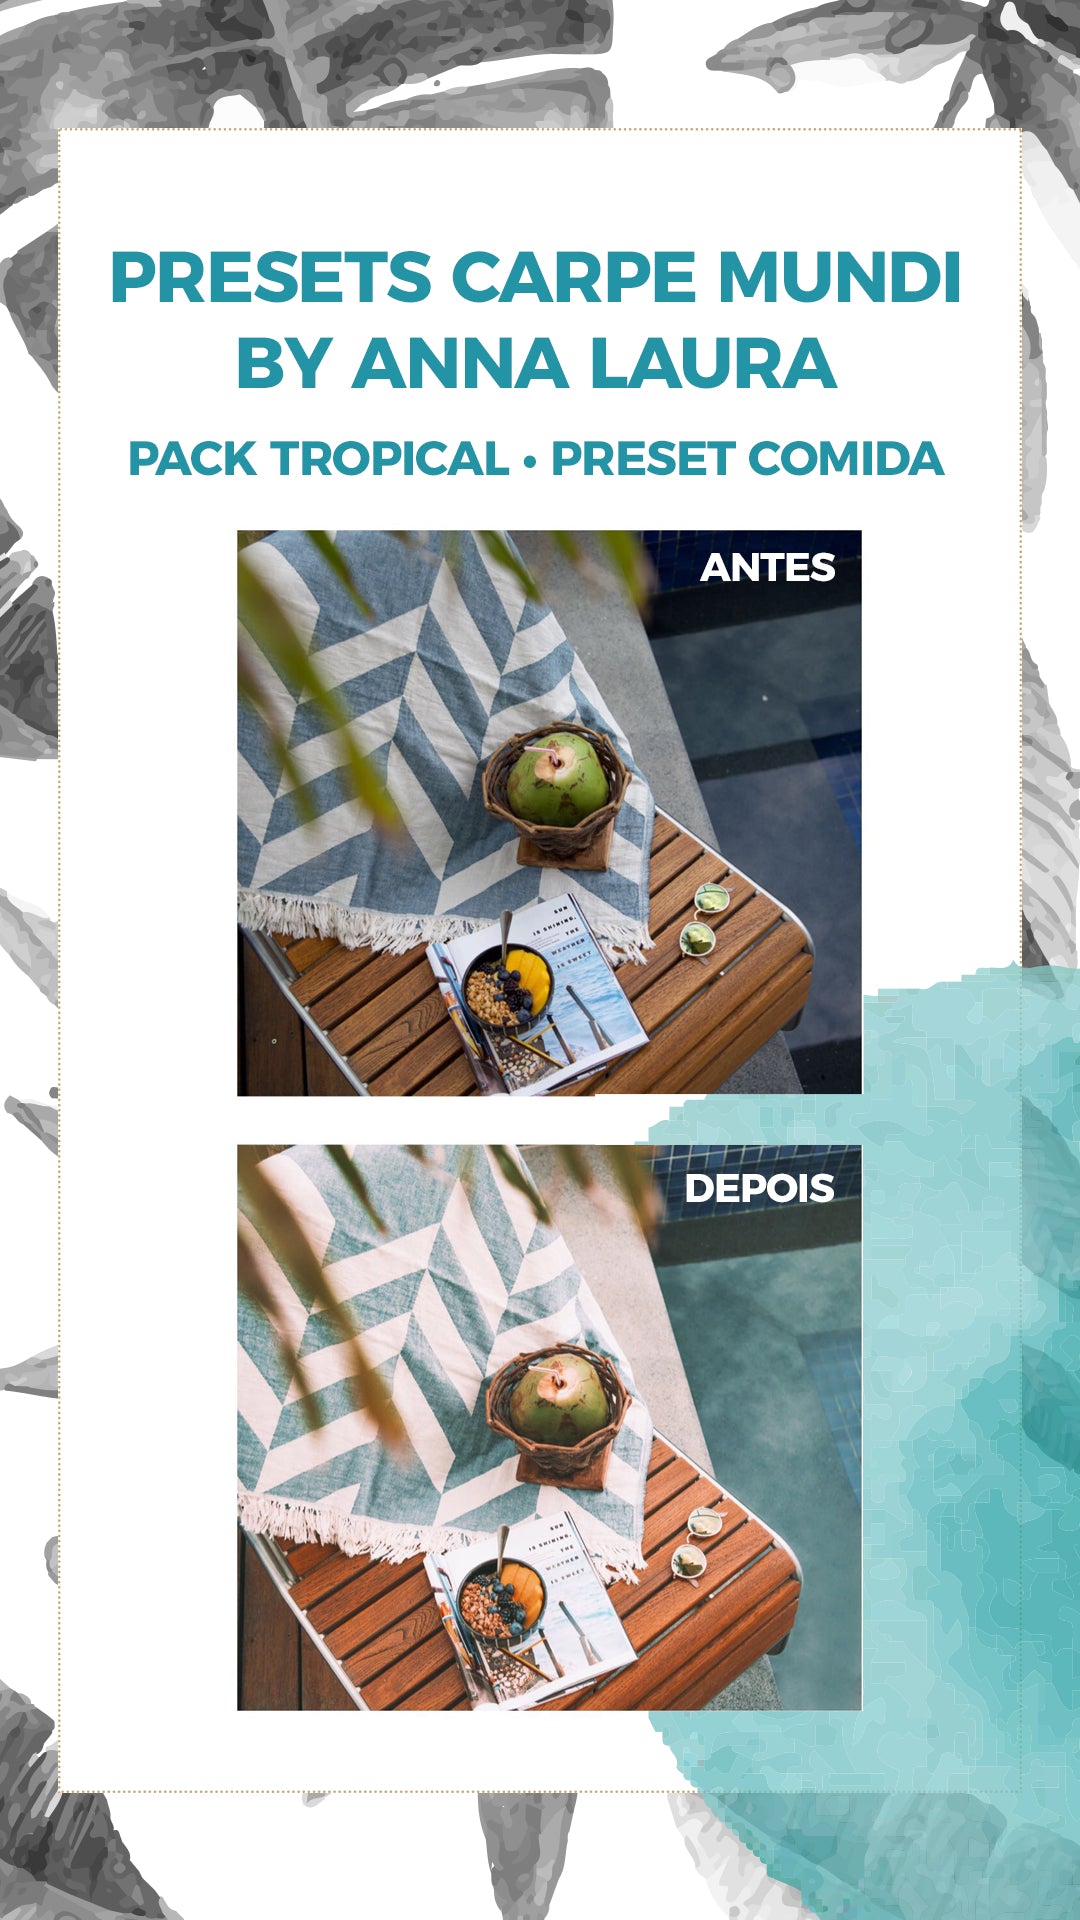 Pack Tropical